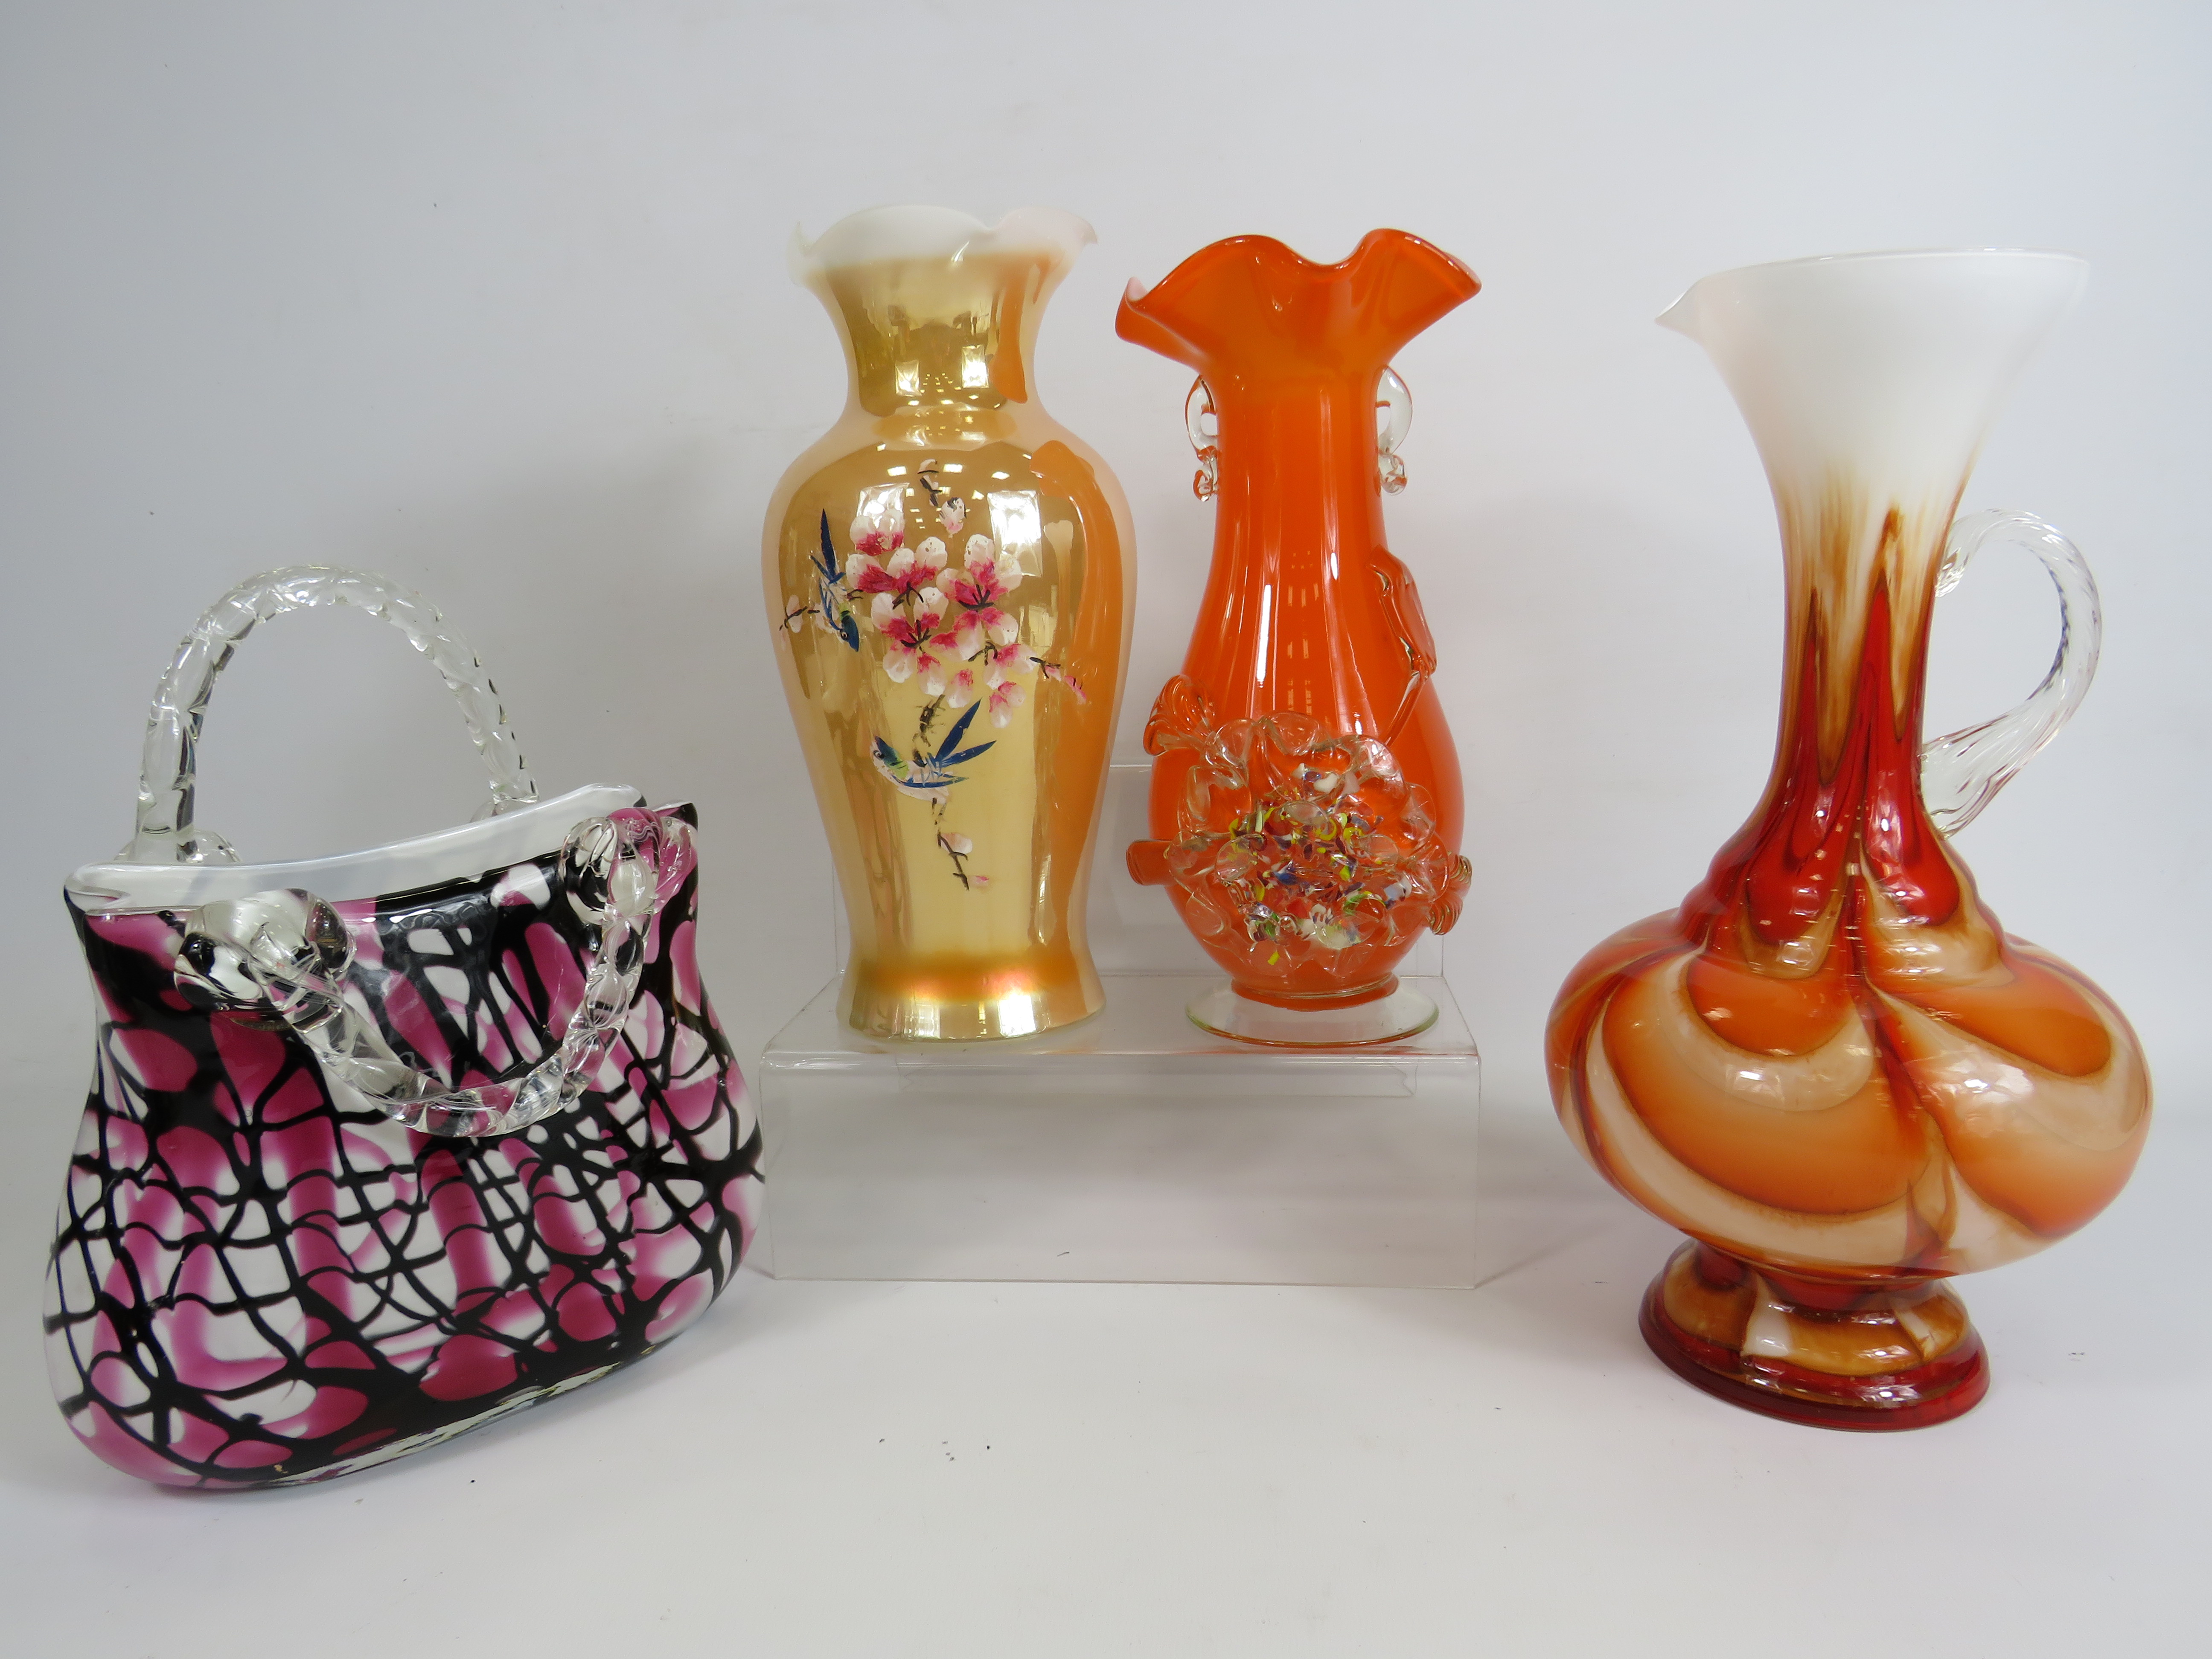 Mid Century Carlo Moretti murano art glass jug, plus two other art glass vases and a art glass bag.